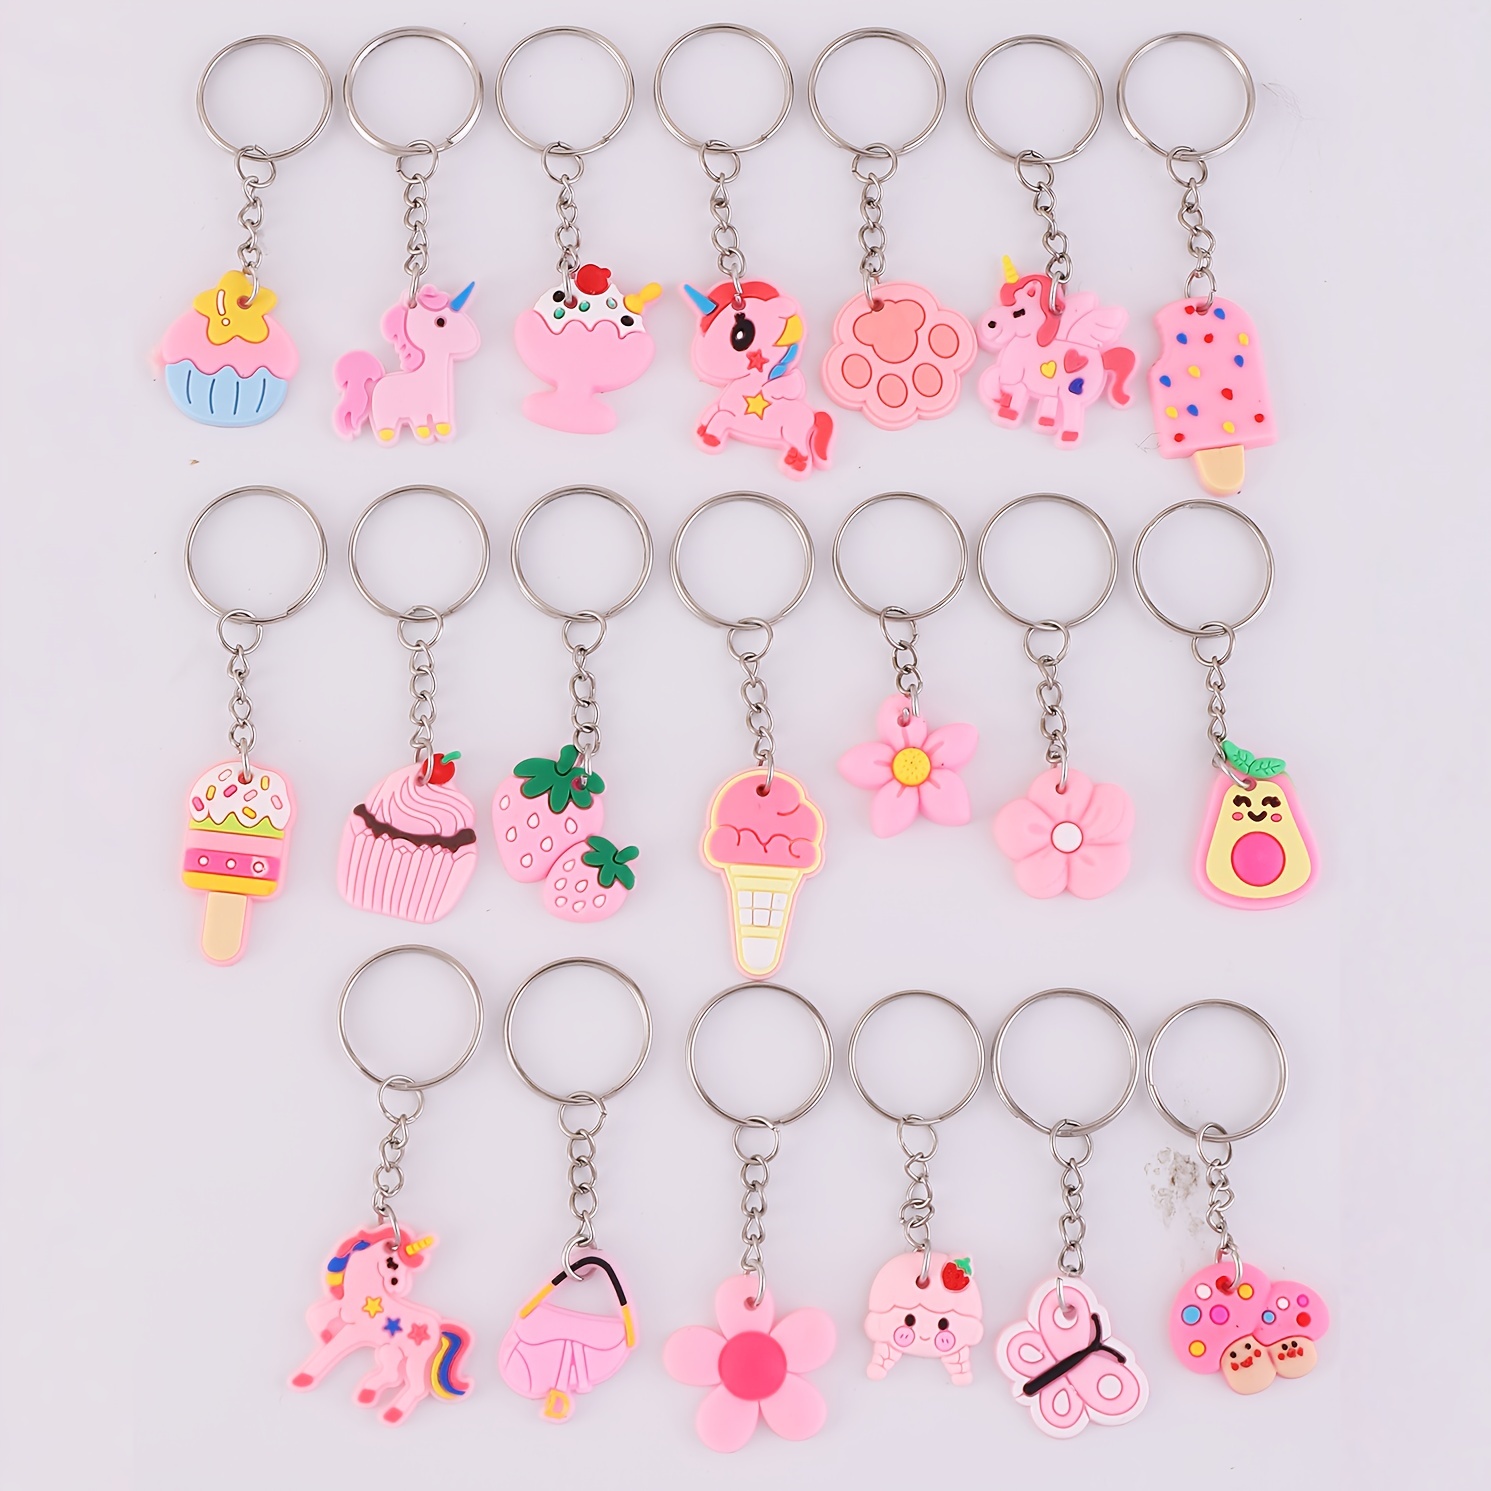 

20pcs Cartoon Keychain Party Favors, Mini Cute Keyring For Classroom Prizes, Birthday Christmas Party Favors Gift, Goodie Bag Stuffers Supplies